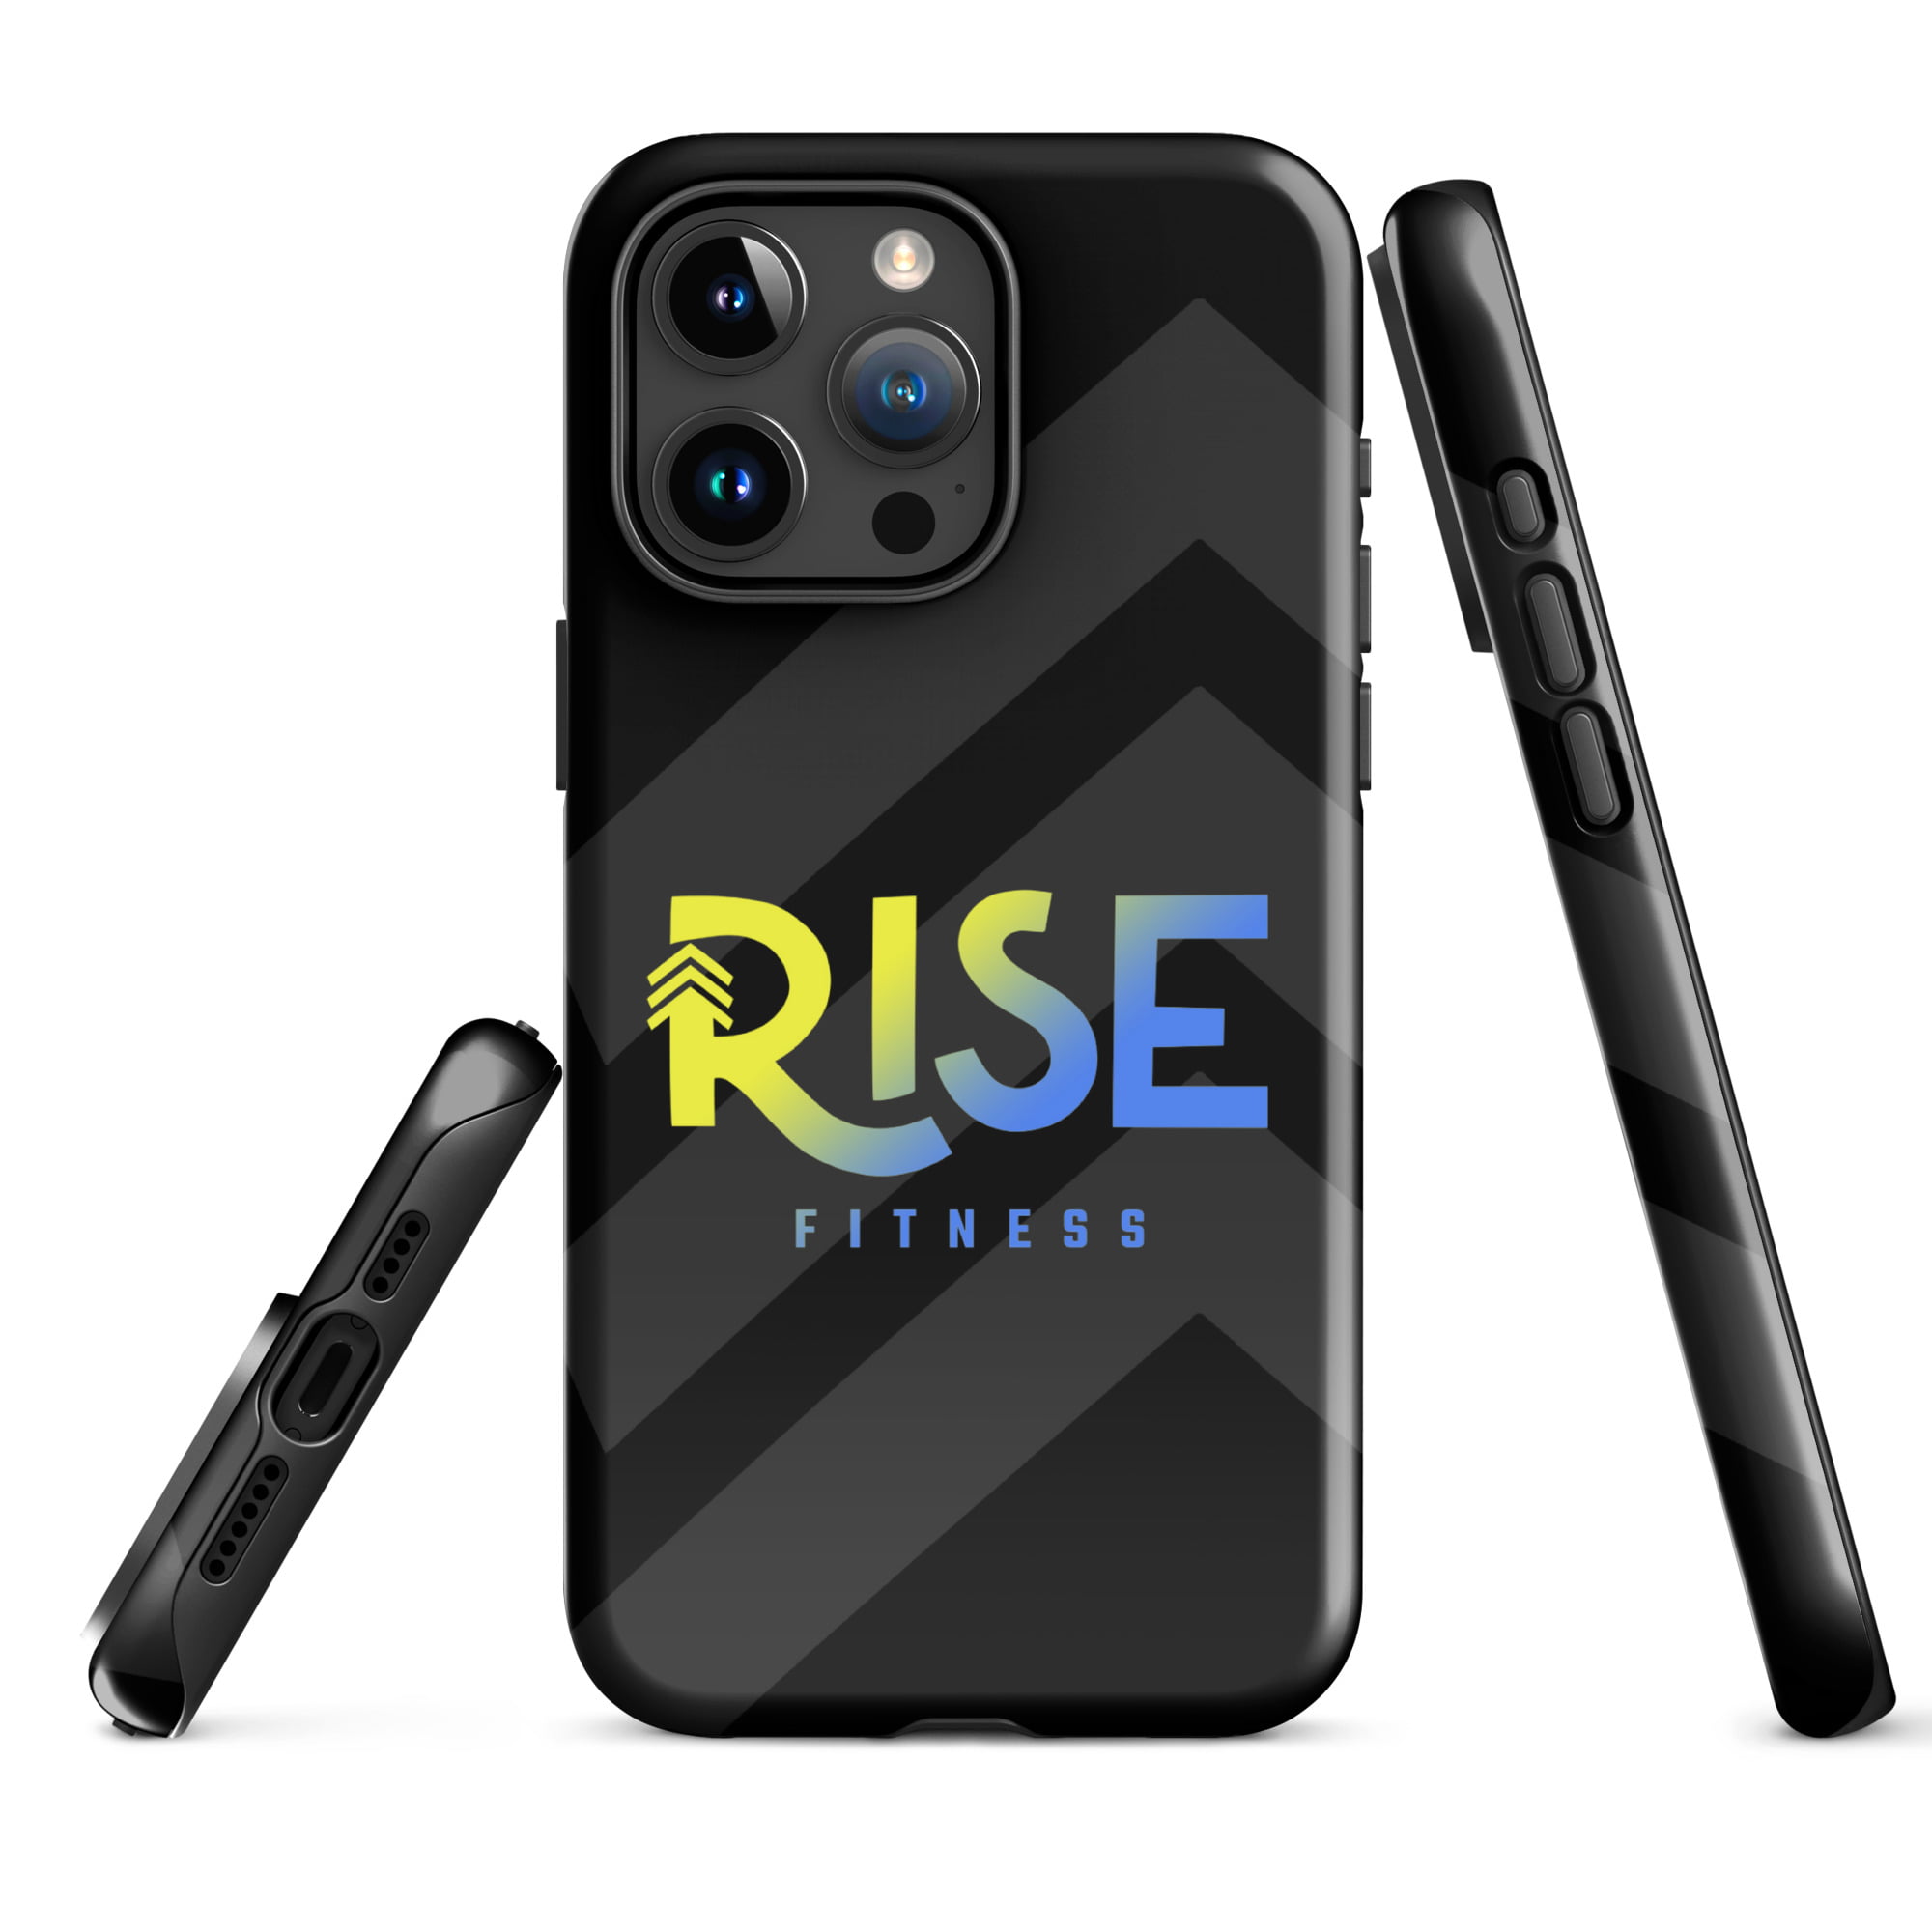 Product image for Rise Fitness iPhone Case (Down syndrome)